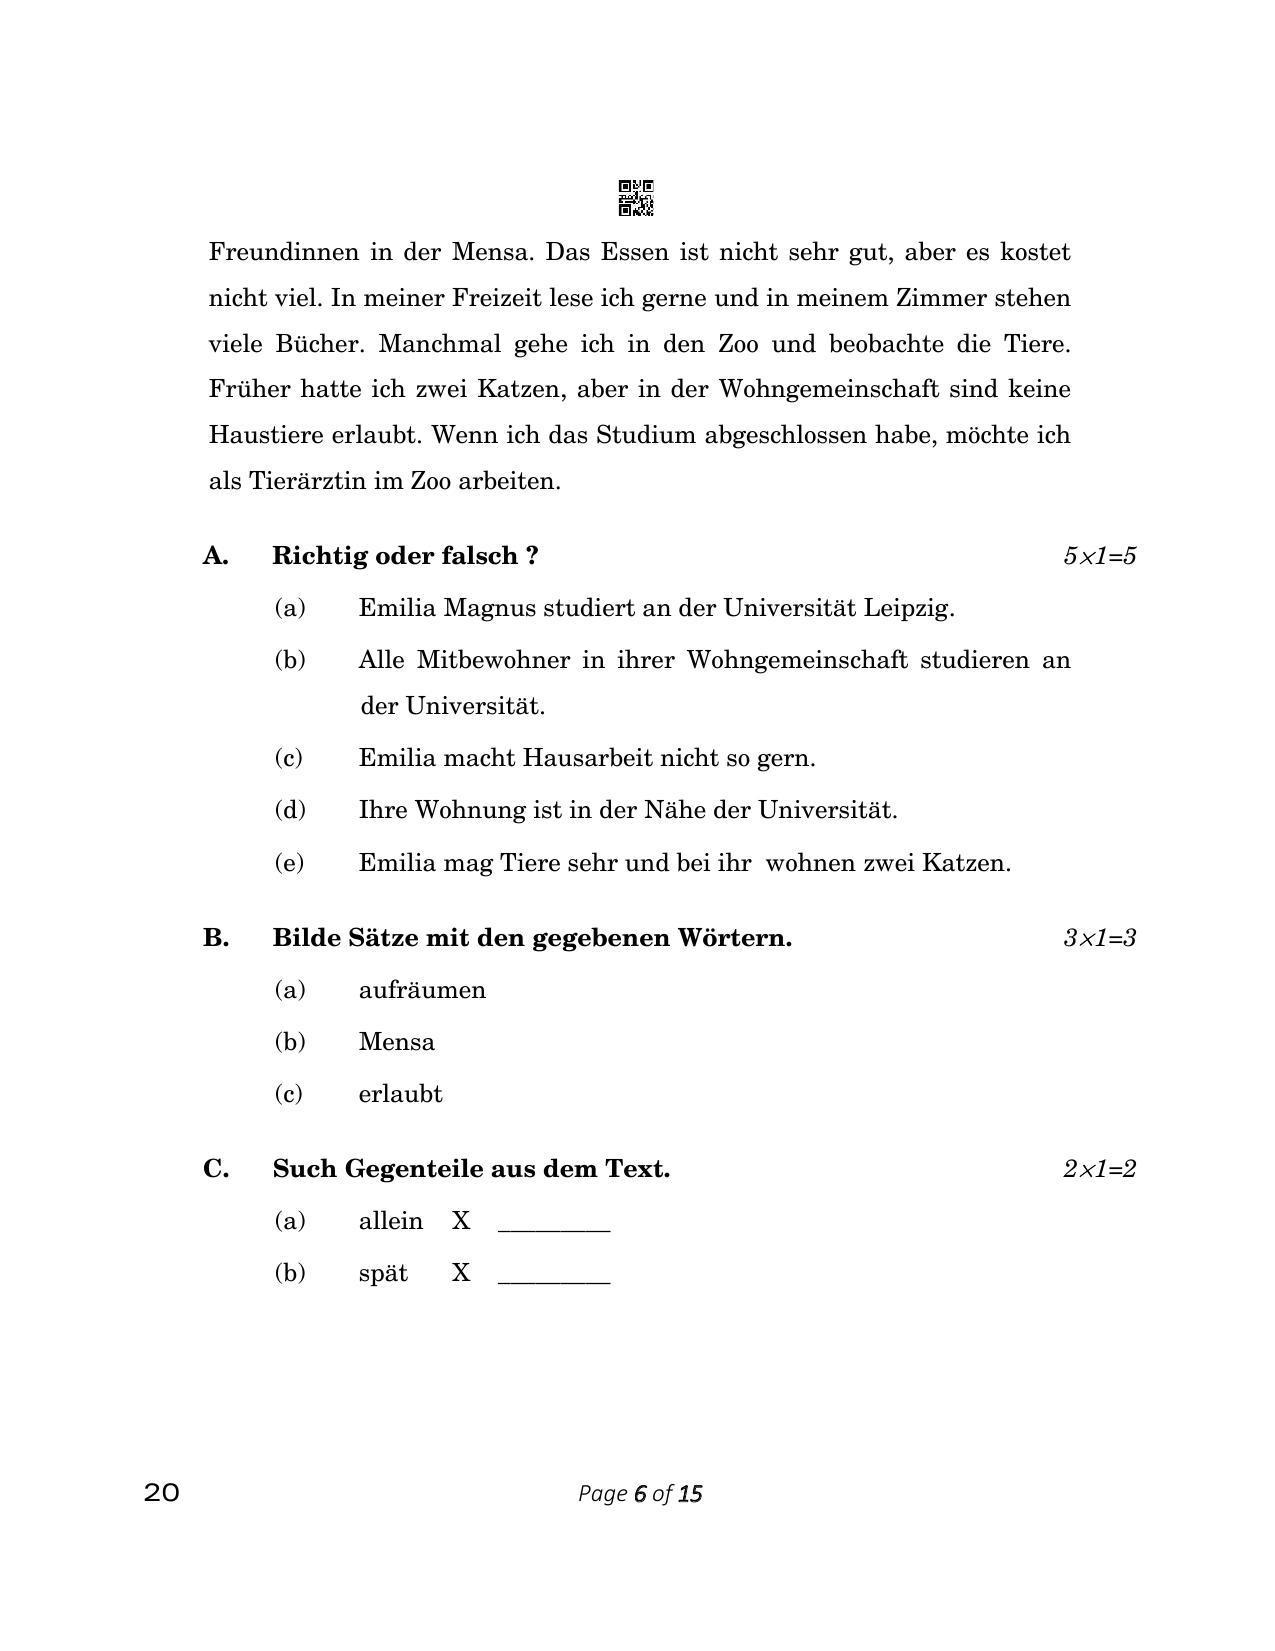 CBSE Class 12 20_German 2023 Question Paper - Page 6